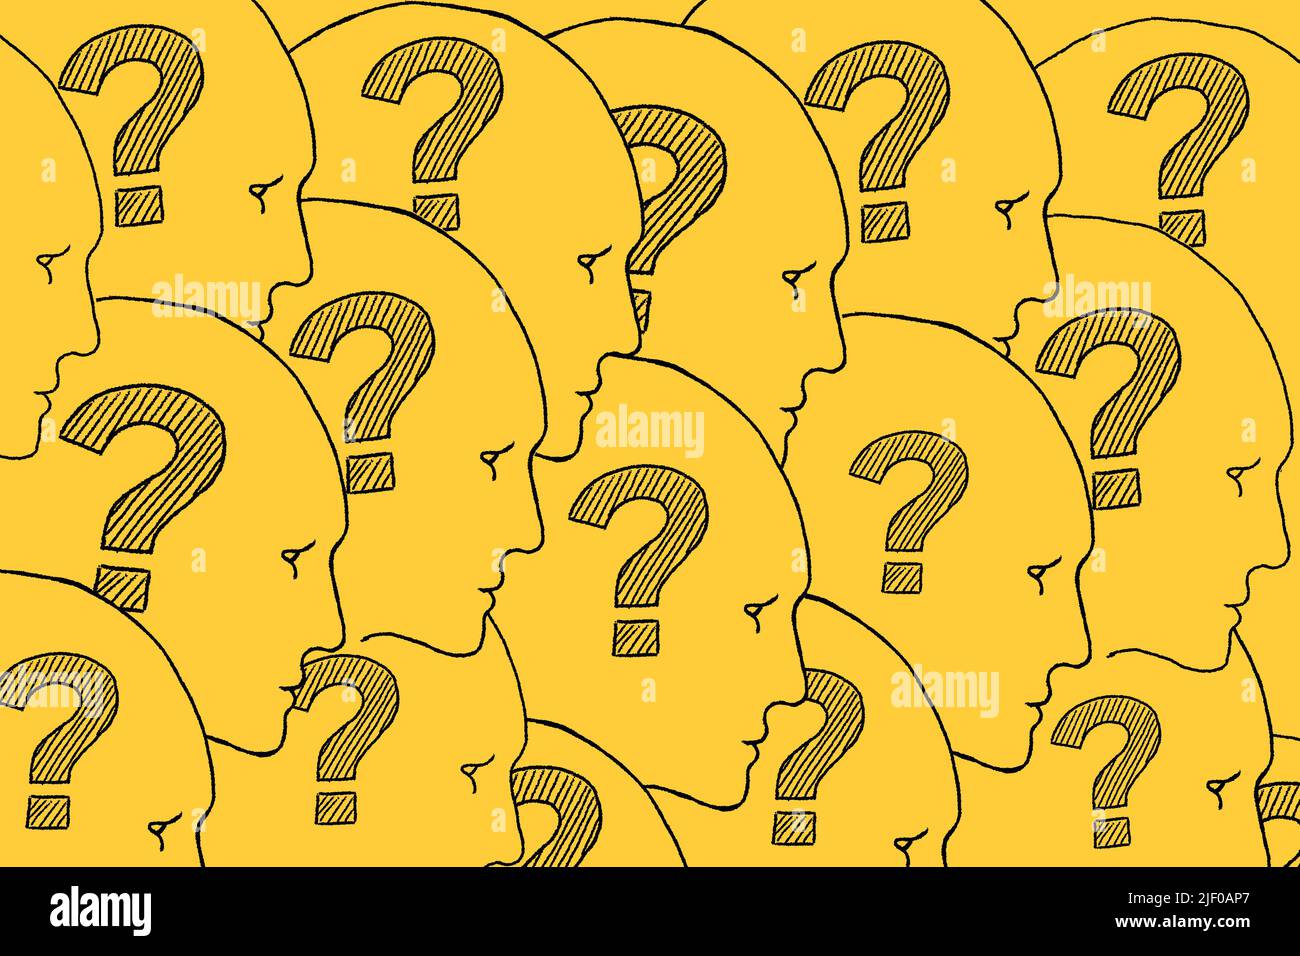 Human faces with question marks inside. Illustration on yellow background. FAQ. Stock Photo